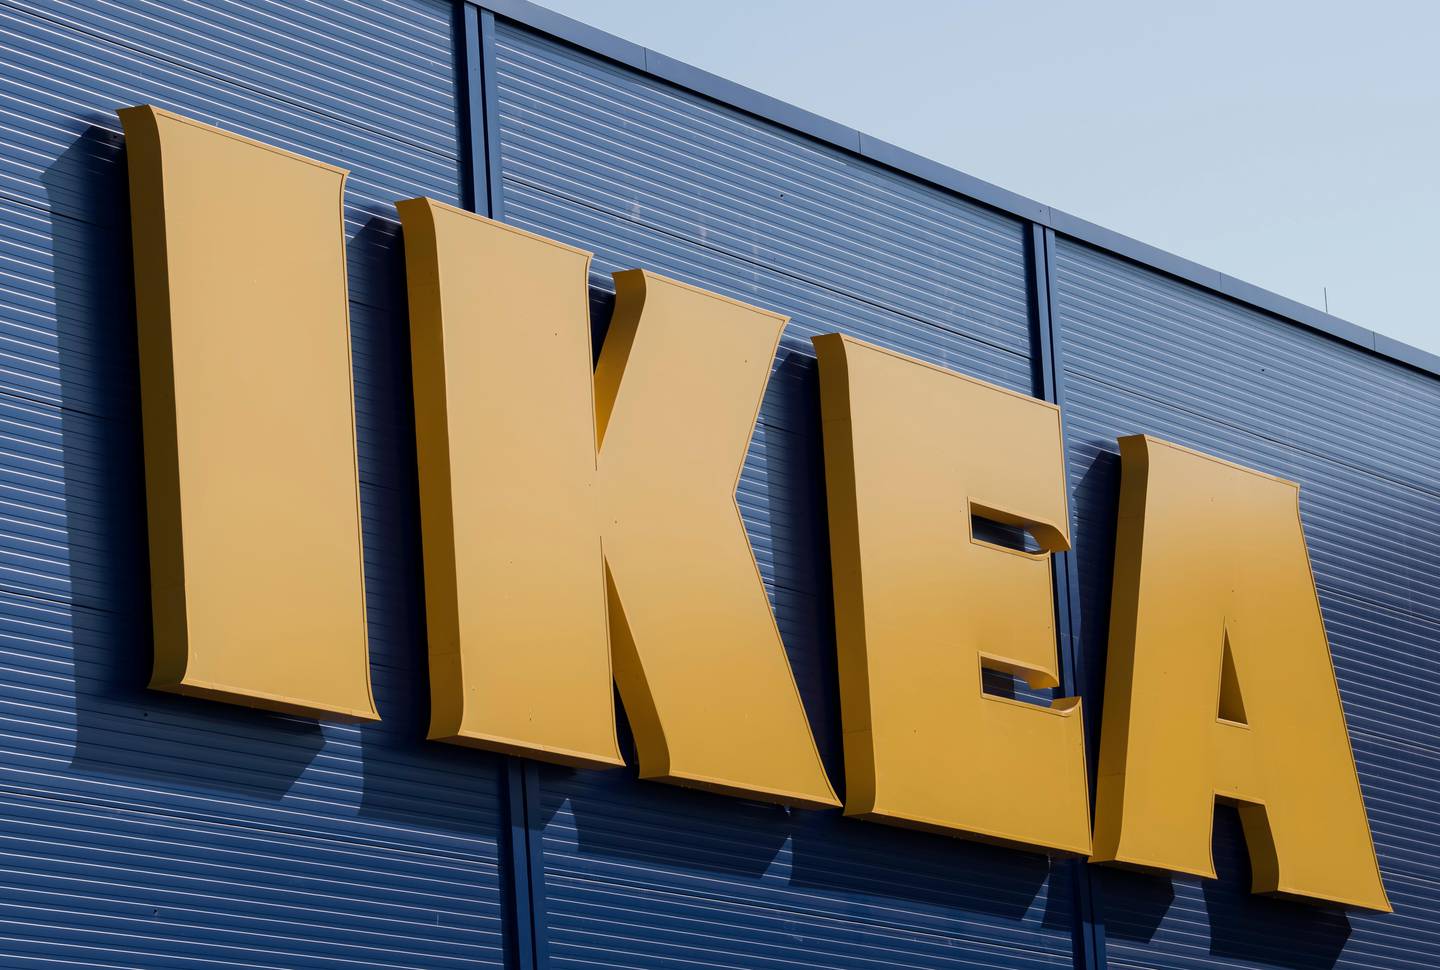 FILE - This is a Wednesday, Aug. 23, 2017 file photo of the IKEA sign at the  IKEA furnishing store in Magdeburg, Germany. Swedish furniture retailer Ikea said Tuesday Oct. 10, 2017 that it will start selling its goods through third-party web sites as a test "but no decisions made regarding what platforms/markets will be in the pilot." (AP Photo/Jens Meyer/File)